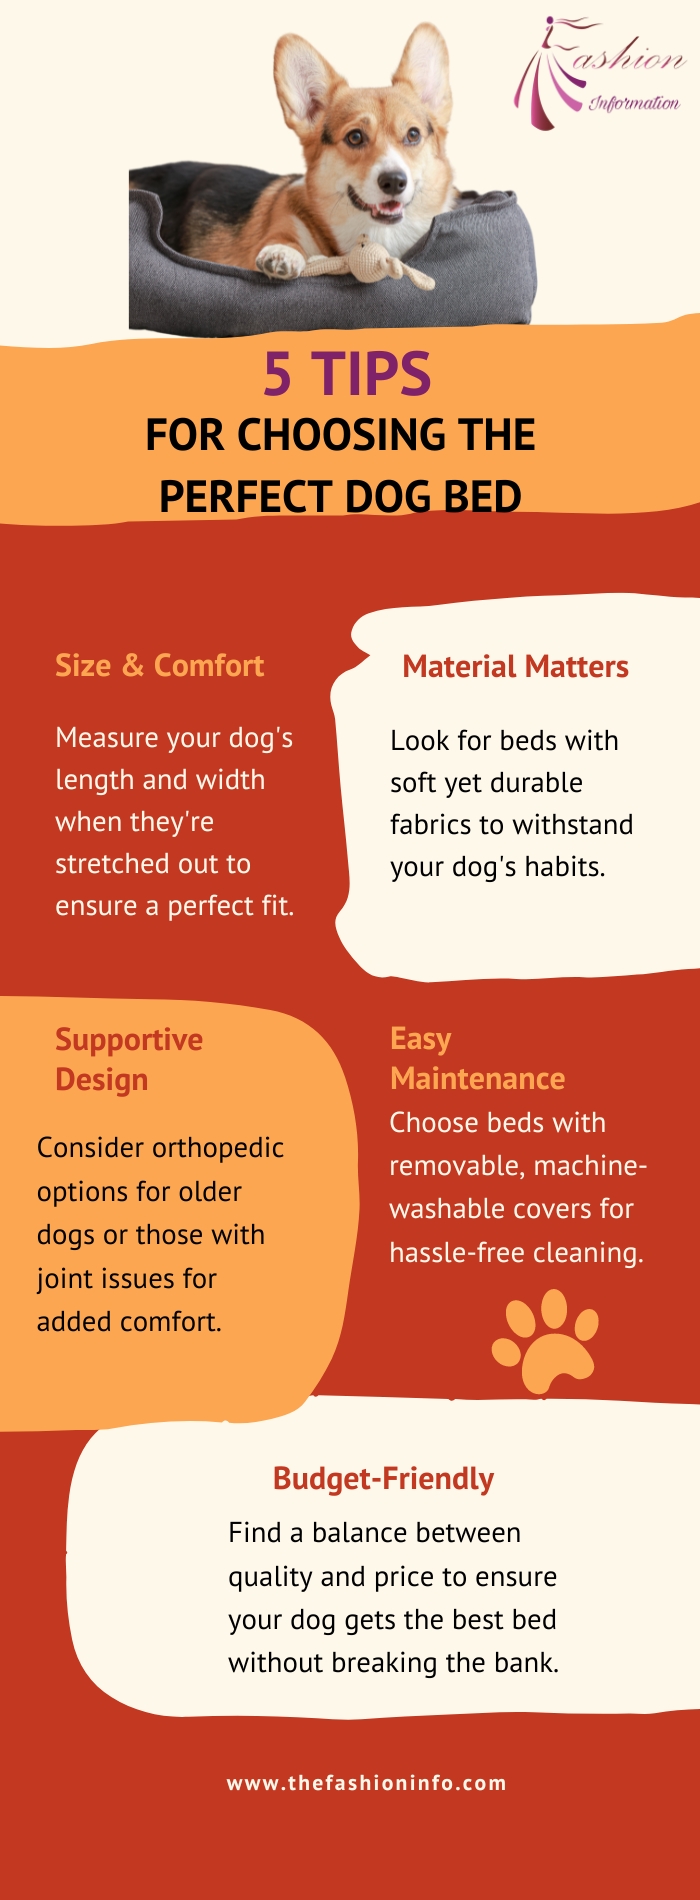 5 Tips for Choosing the Perfect Dog Bed